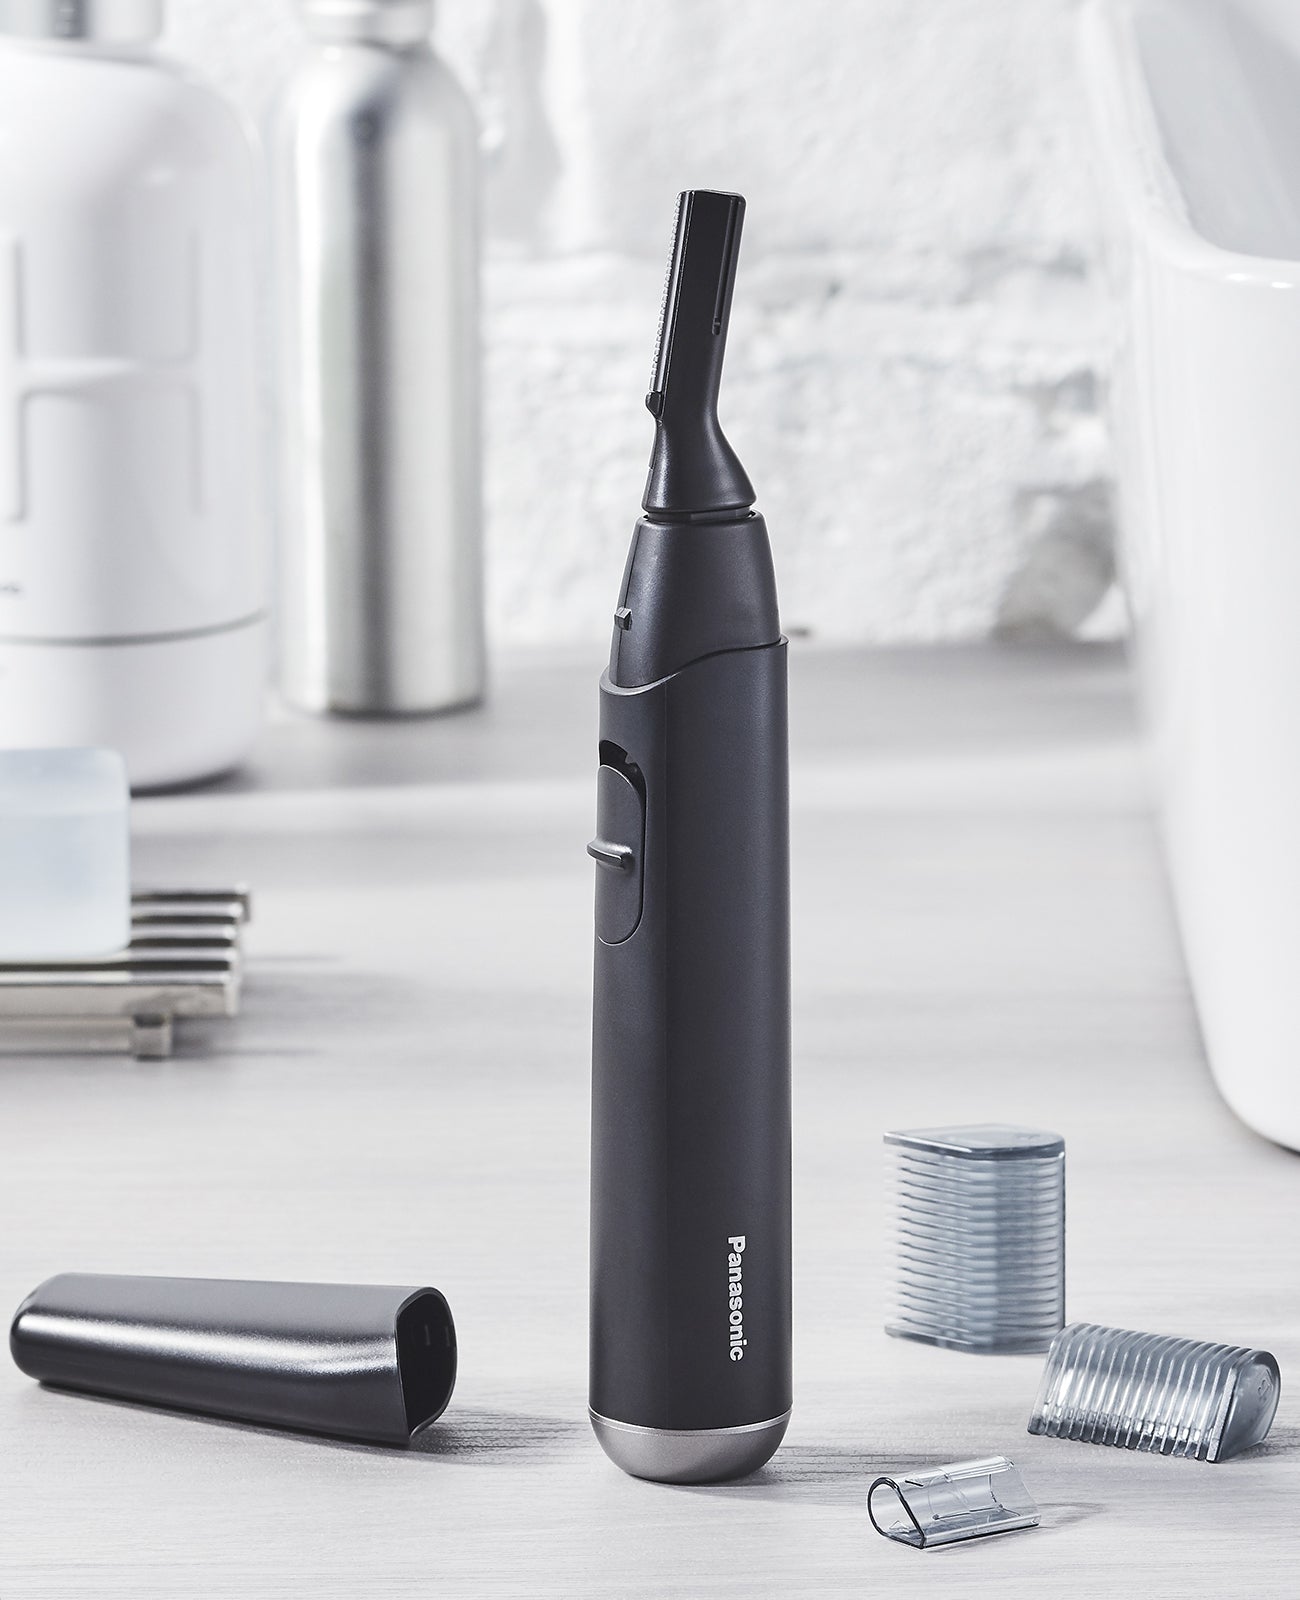 Panasonic Facial Hair Trimmer for Sensitive Skin and First-Time